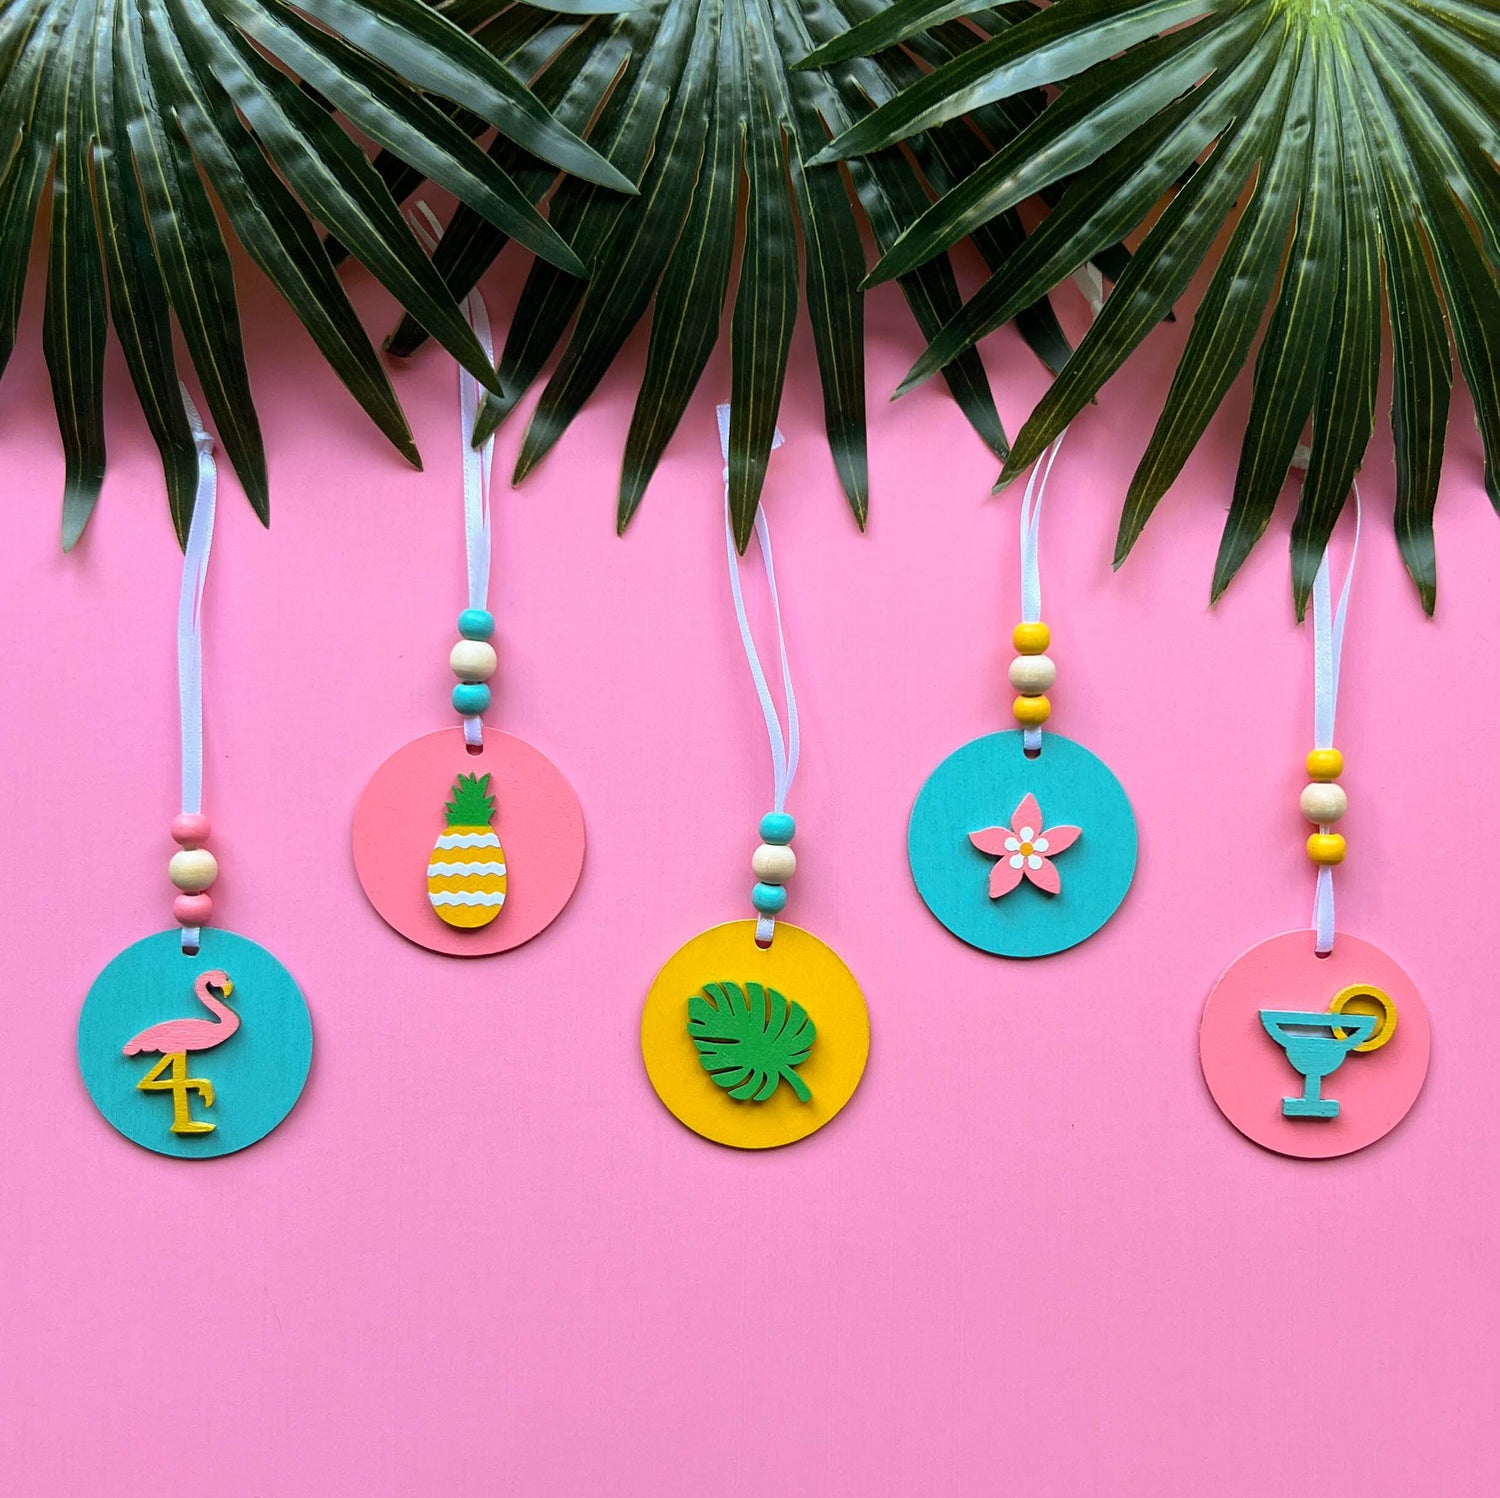 Image of three handmade summer themed wood ornaments featuring a shell, crab, or starfish. Ornaments are placed on a blue background with starfish.